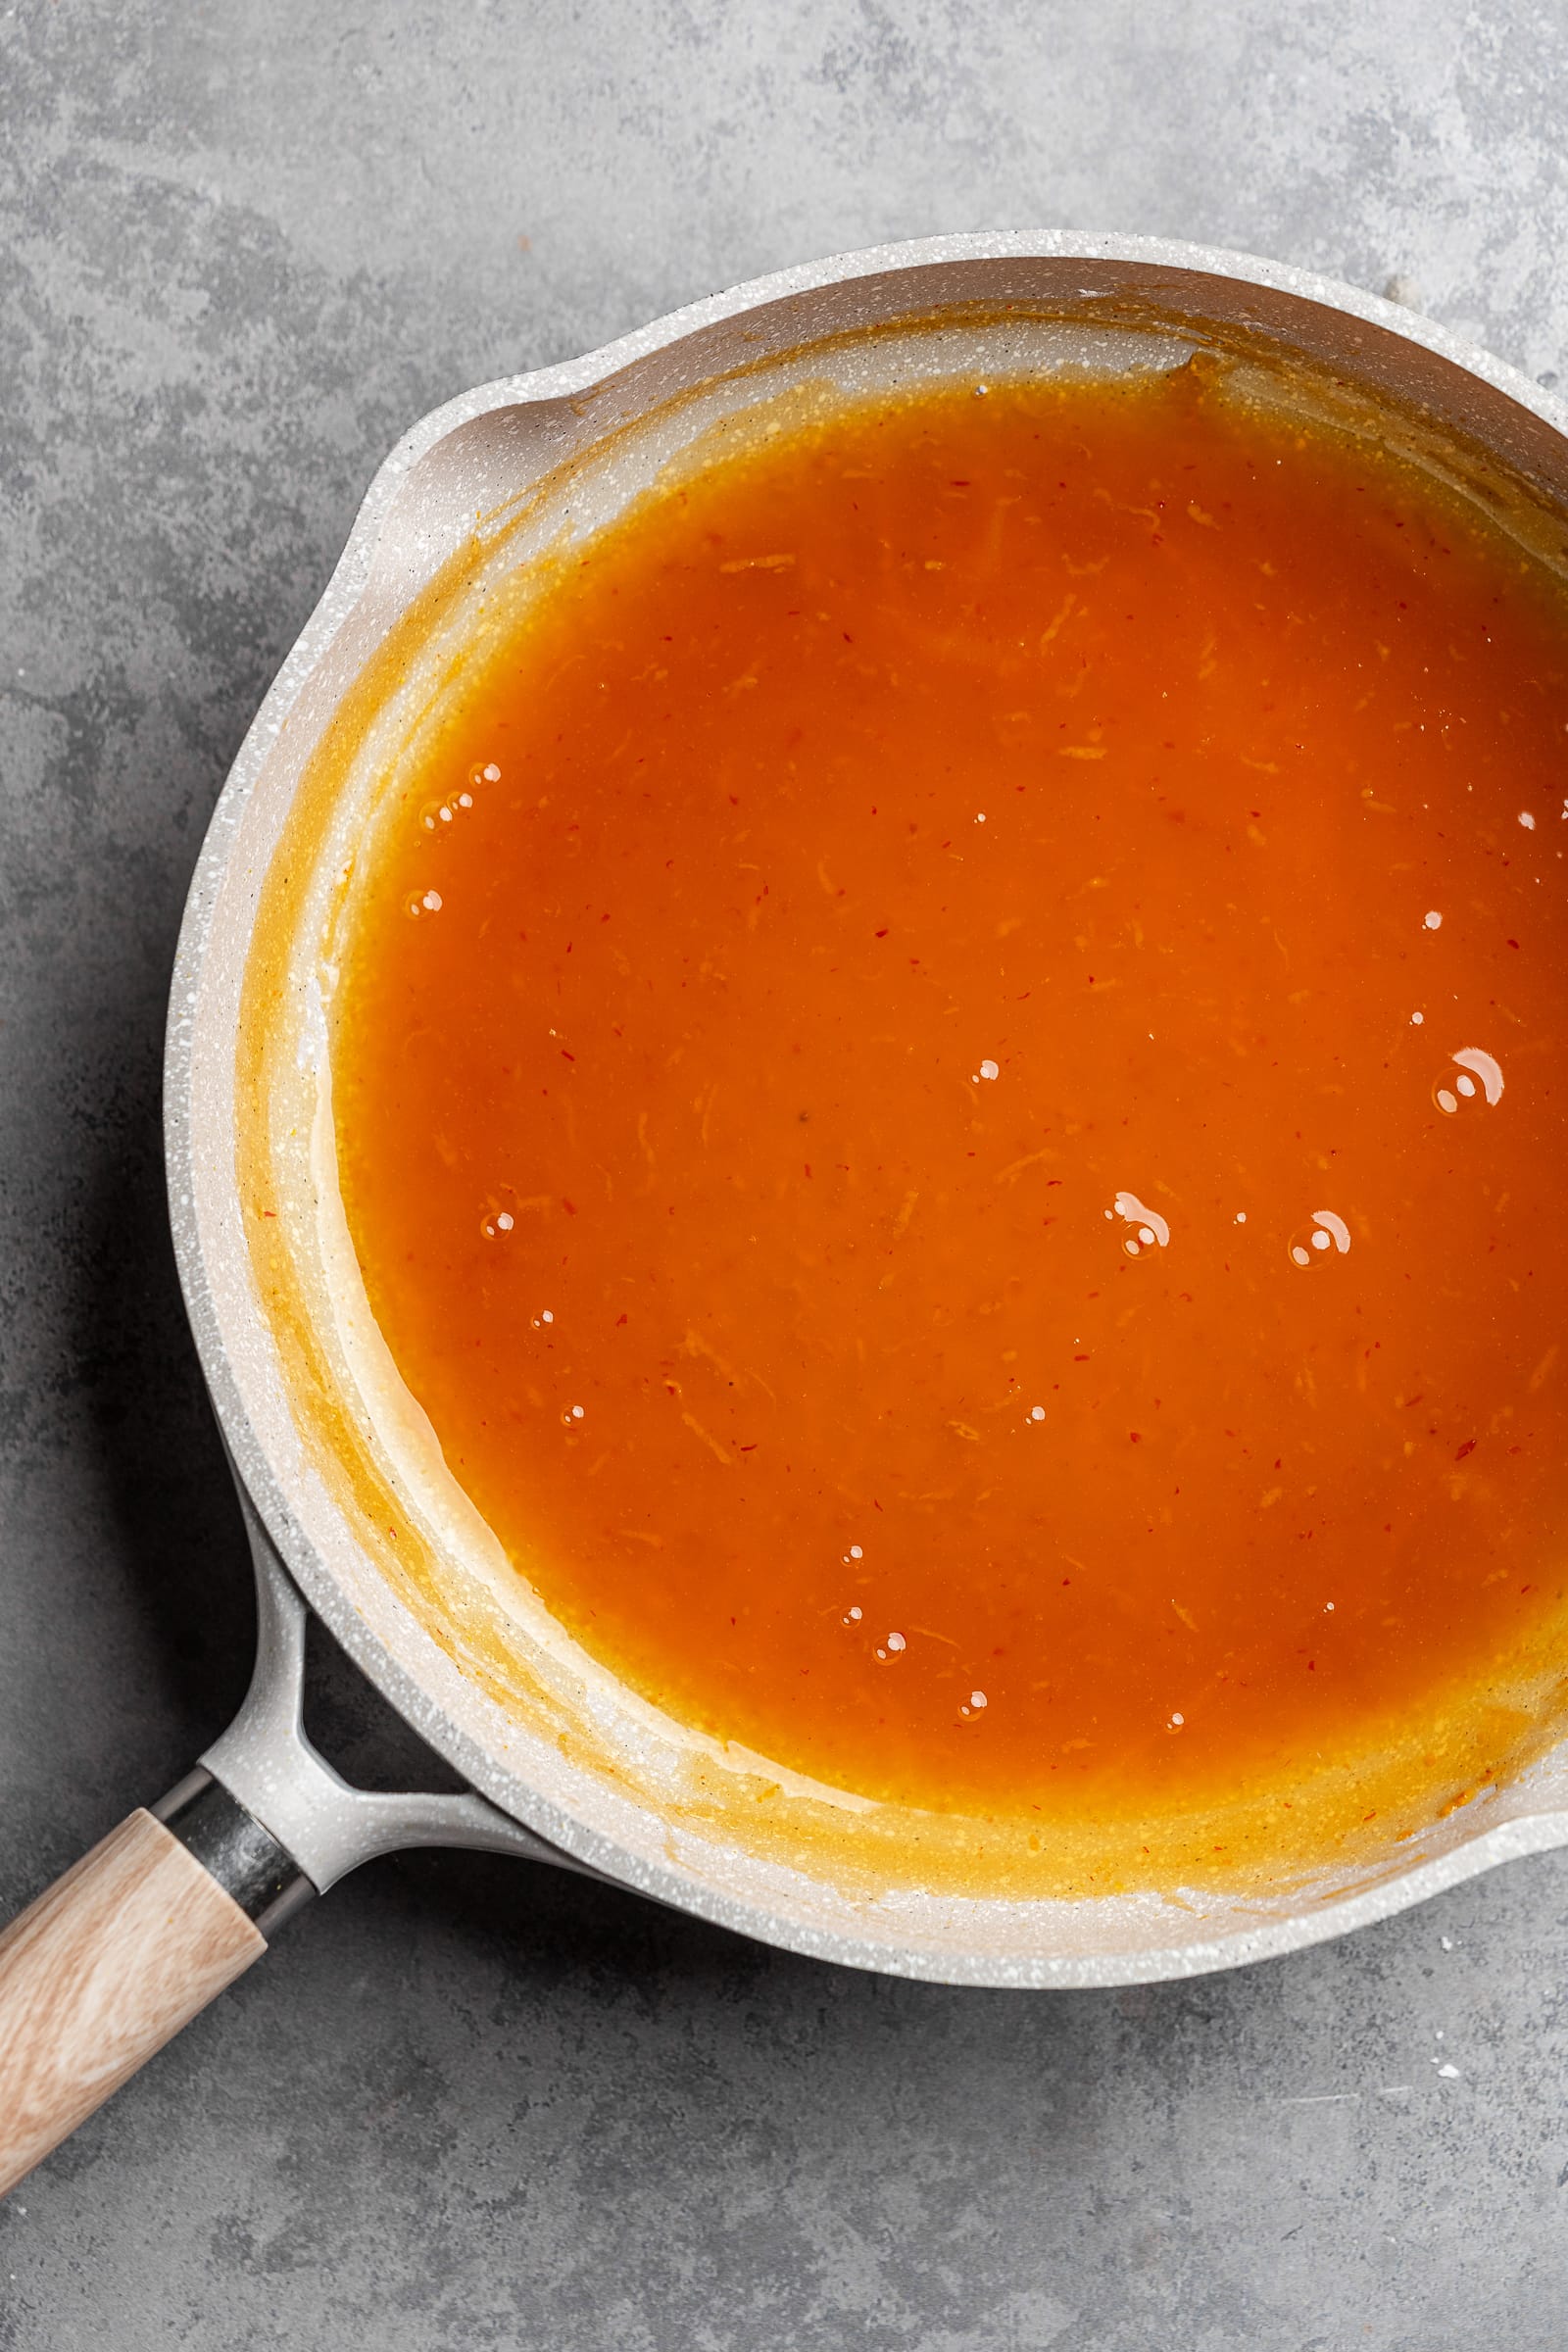 Orange sauce in a pan after simmering.